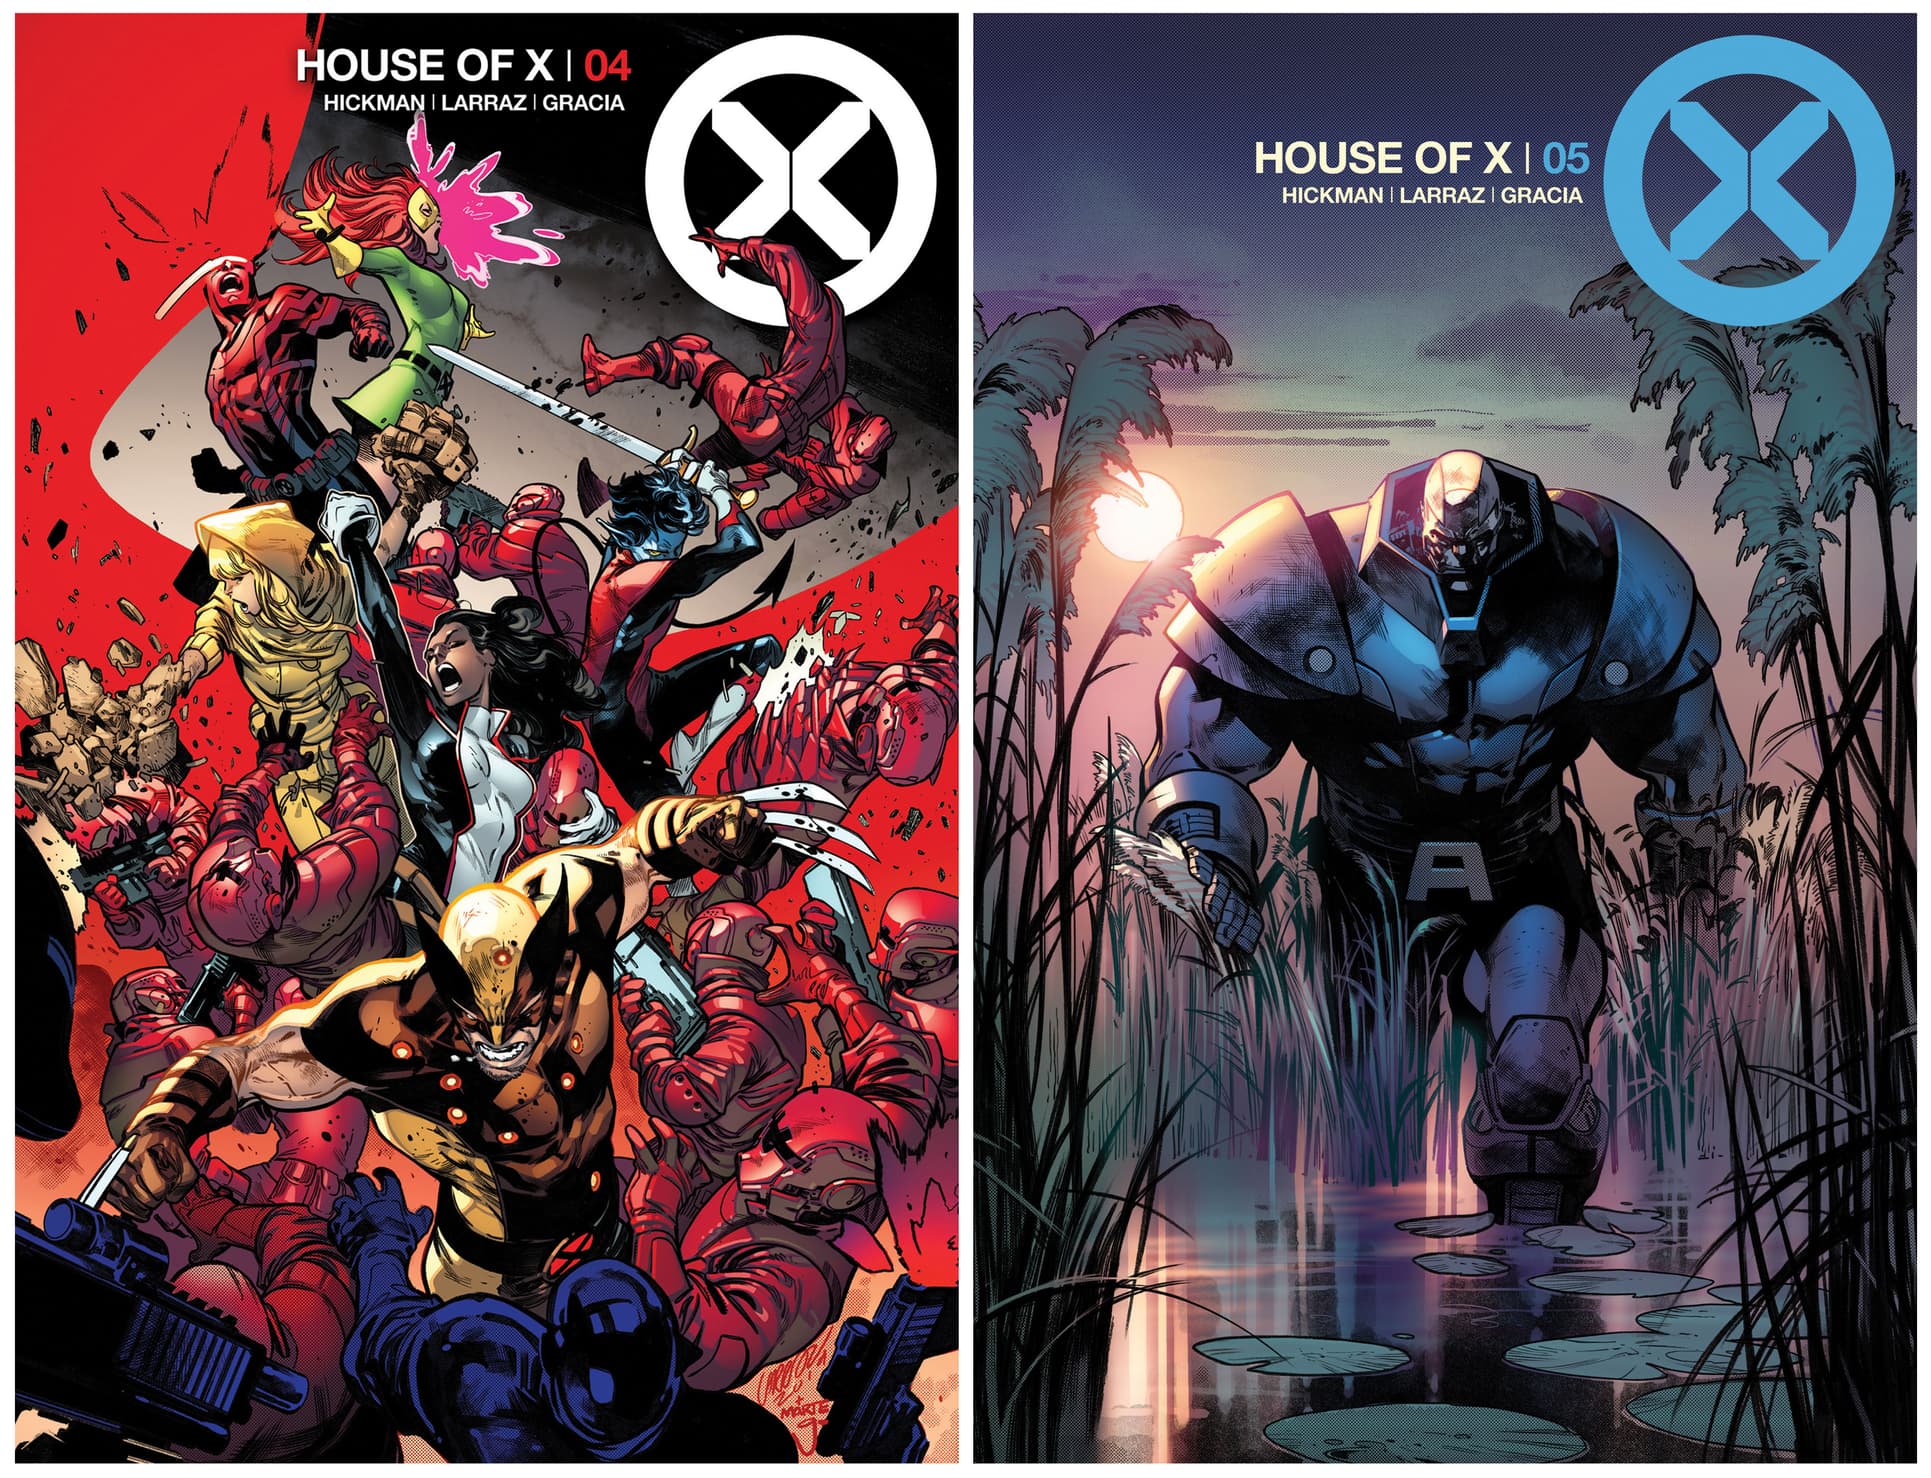 HOUSE OF X #4 AND #5